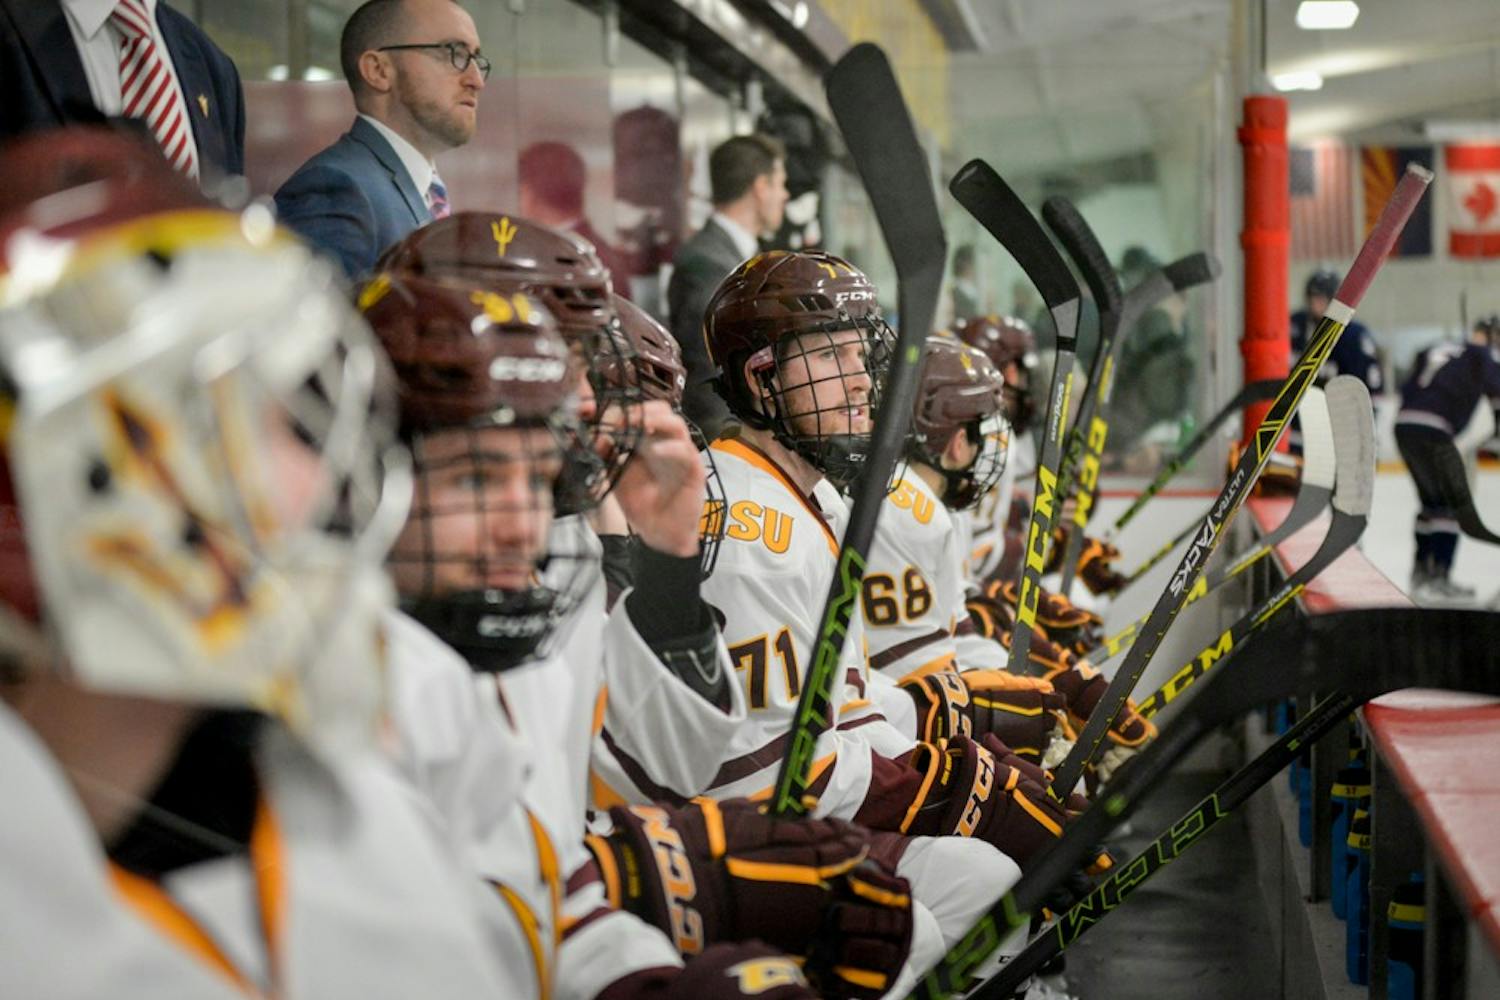 ASU's Hockey team looks on from the bench as the second period progresses on Tuesday, January 5, 2016 at the Oceanside Ice Arena in Tempe, AZ.